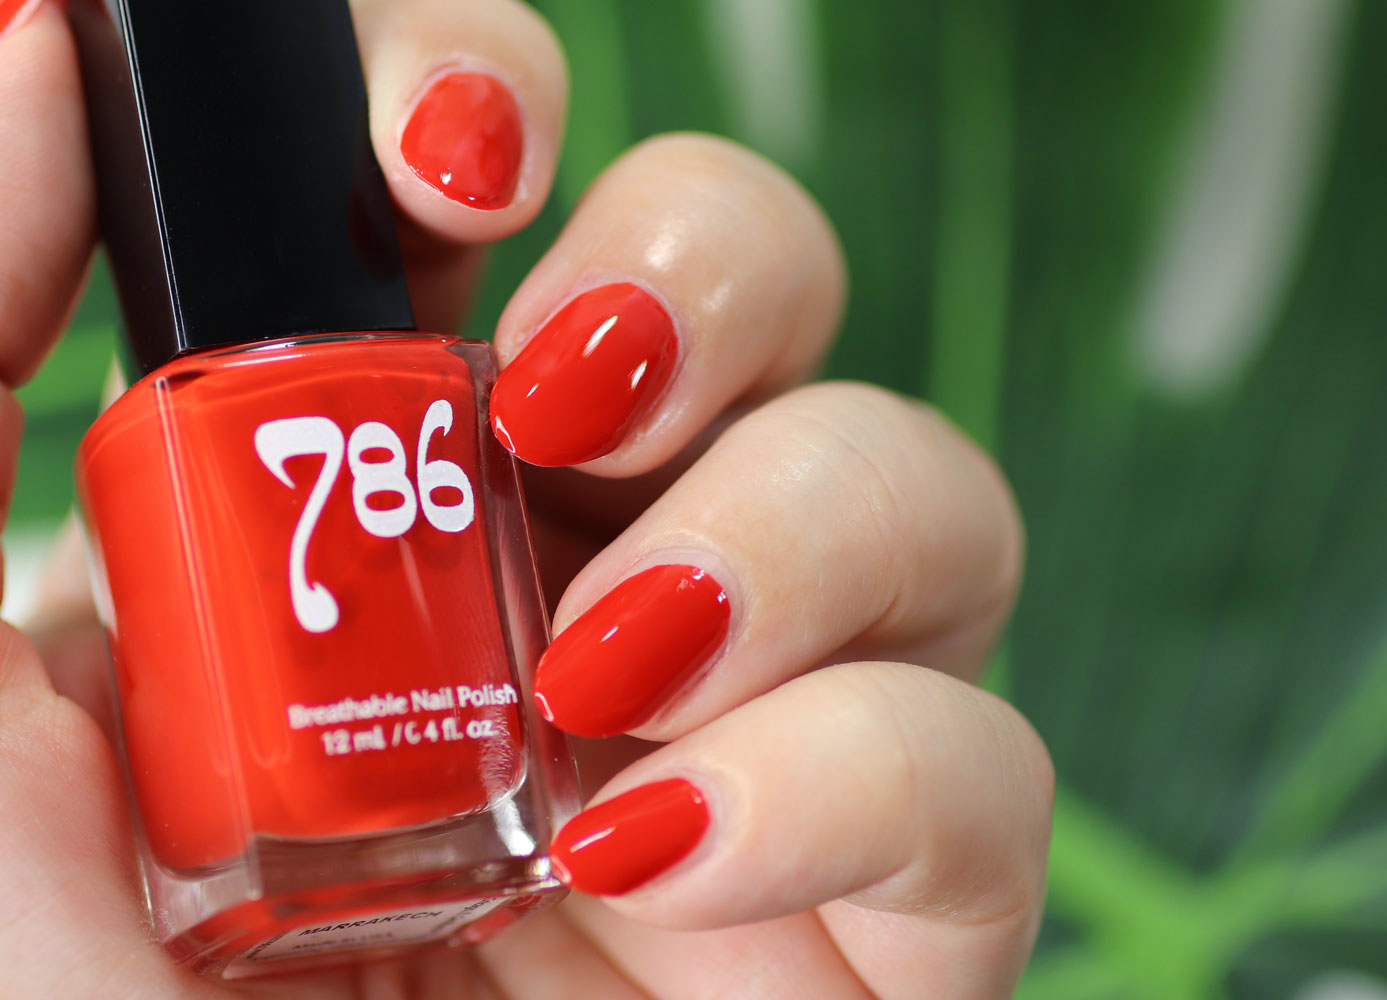 786 Cosmetics Nail Polish in "Color Me In" - wide 4